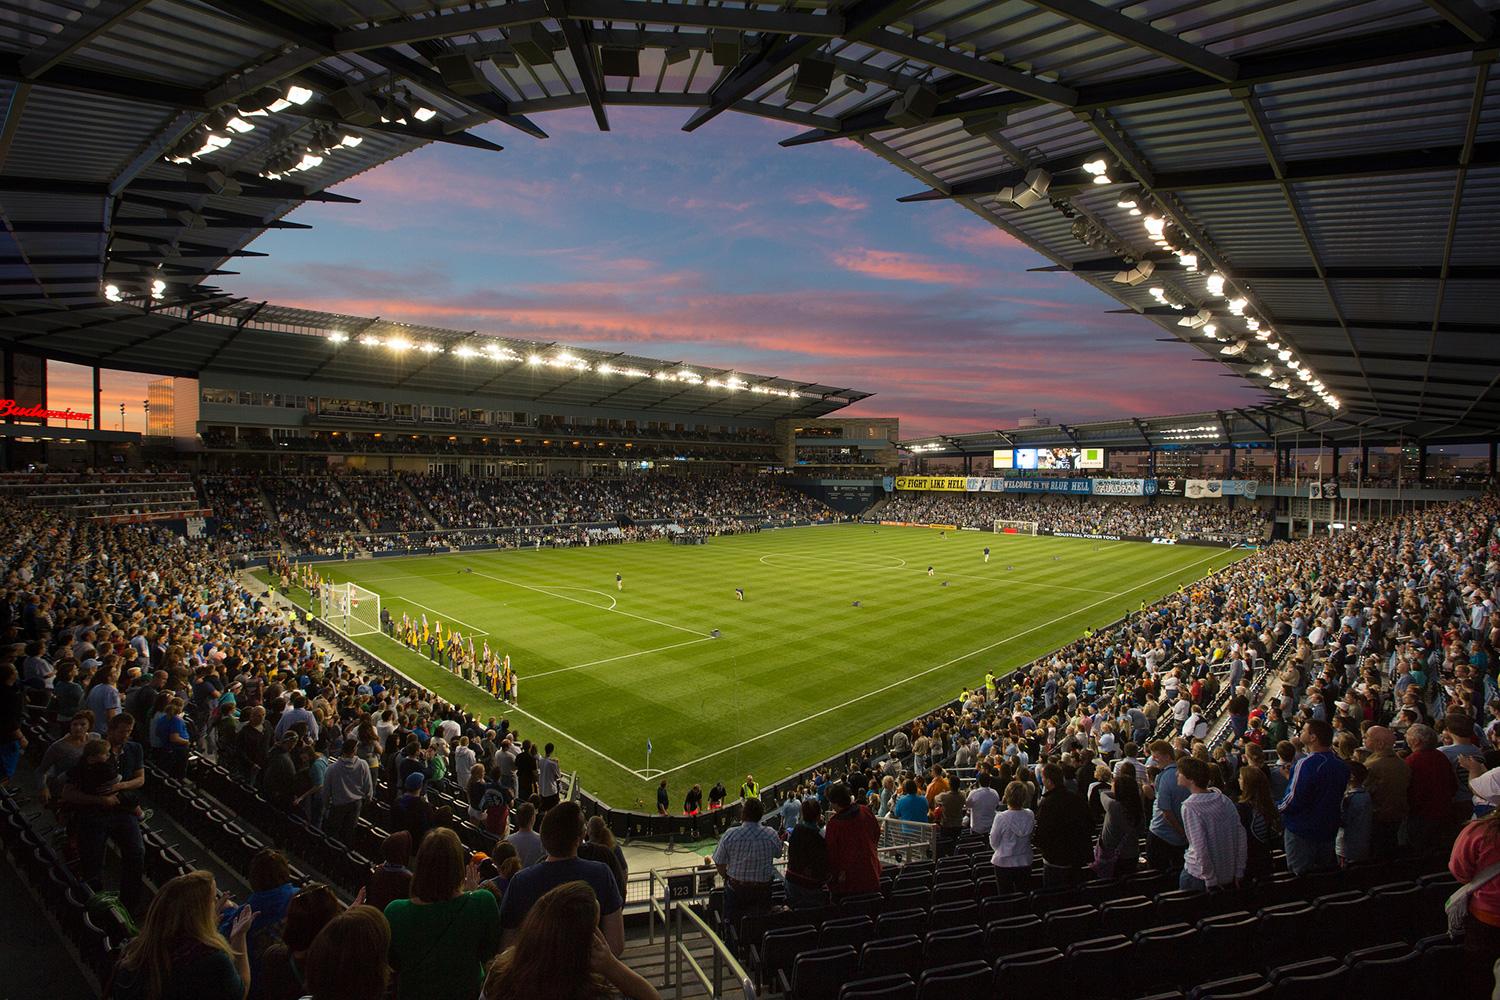 Sporting Park in Kansas City home to the MLS club Sporting KC is a 1500x1000